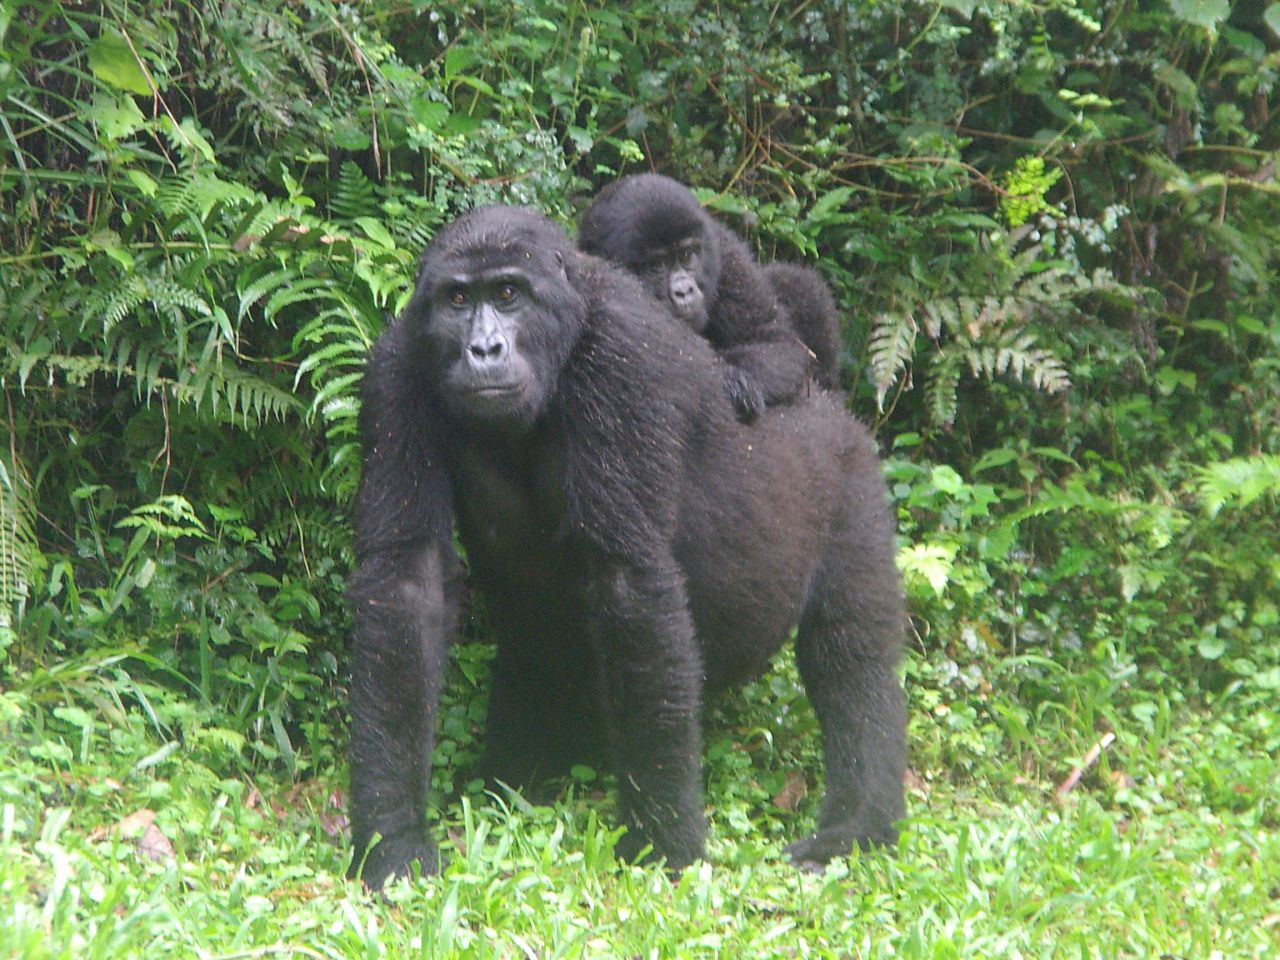 Adult female "Karungyi" gently carries one of the infant gorillas of the Rushegura group in Bwindi Impenetrable National Park in 2007. 